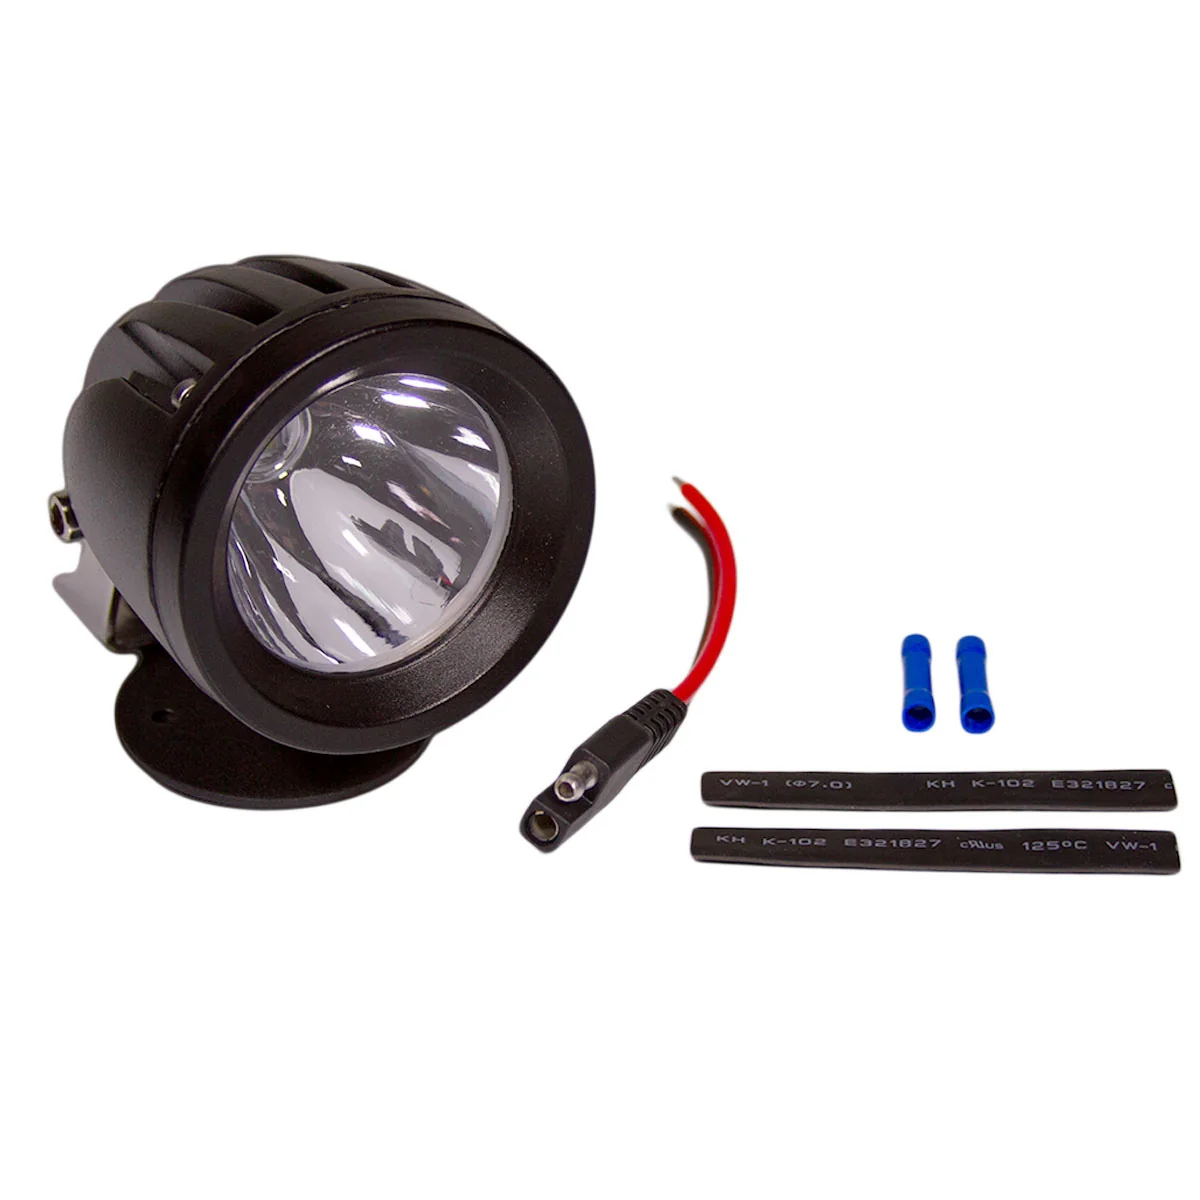 3" LED Spot Light With YP-SAE4 Power Plug Questions & Answers